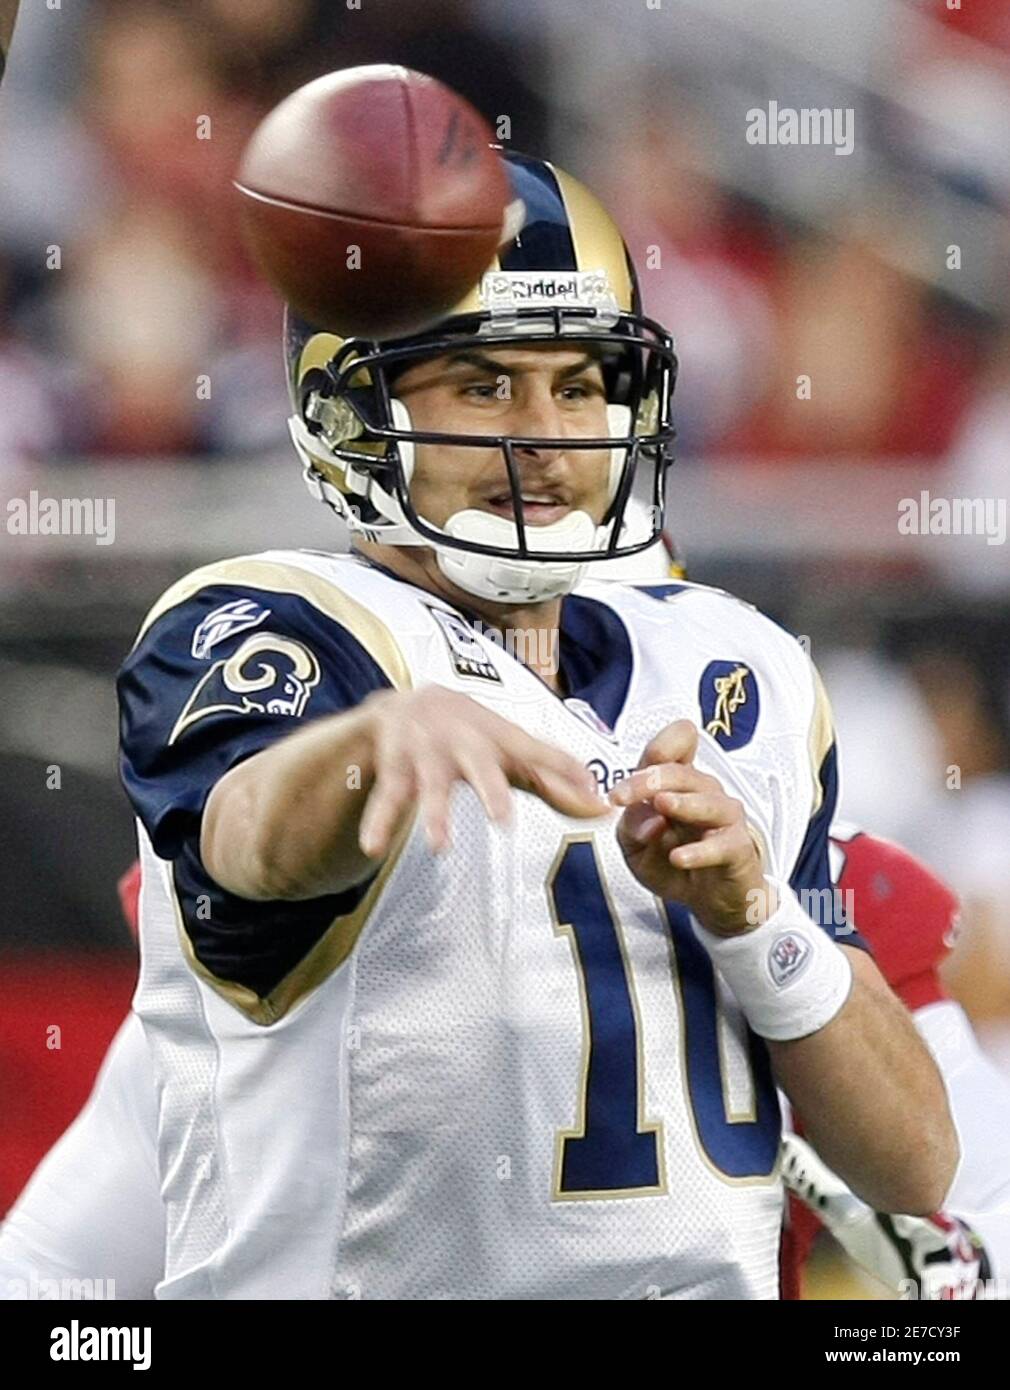 St Louis Rams quarterback Marc Bulger throws down field against the Arizona Cardinals in the third quarter during an NFL game in Glendale, Arizona, December 7, 2008. The Cardinals captured the NFC West by defeating the Rams 34-10. REUTERS/Rick Scuteri (UNITED STATES) Stock Photo